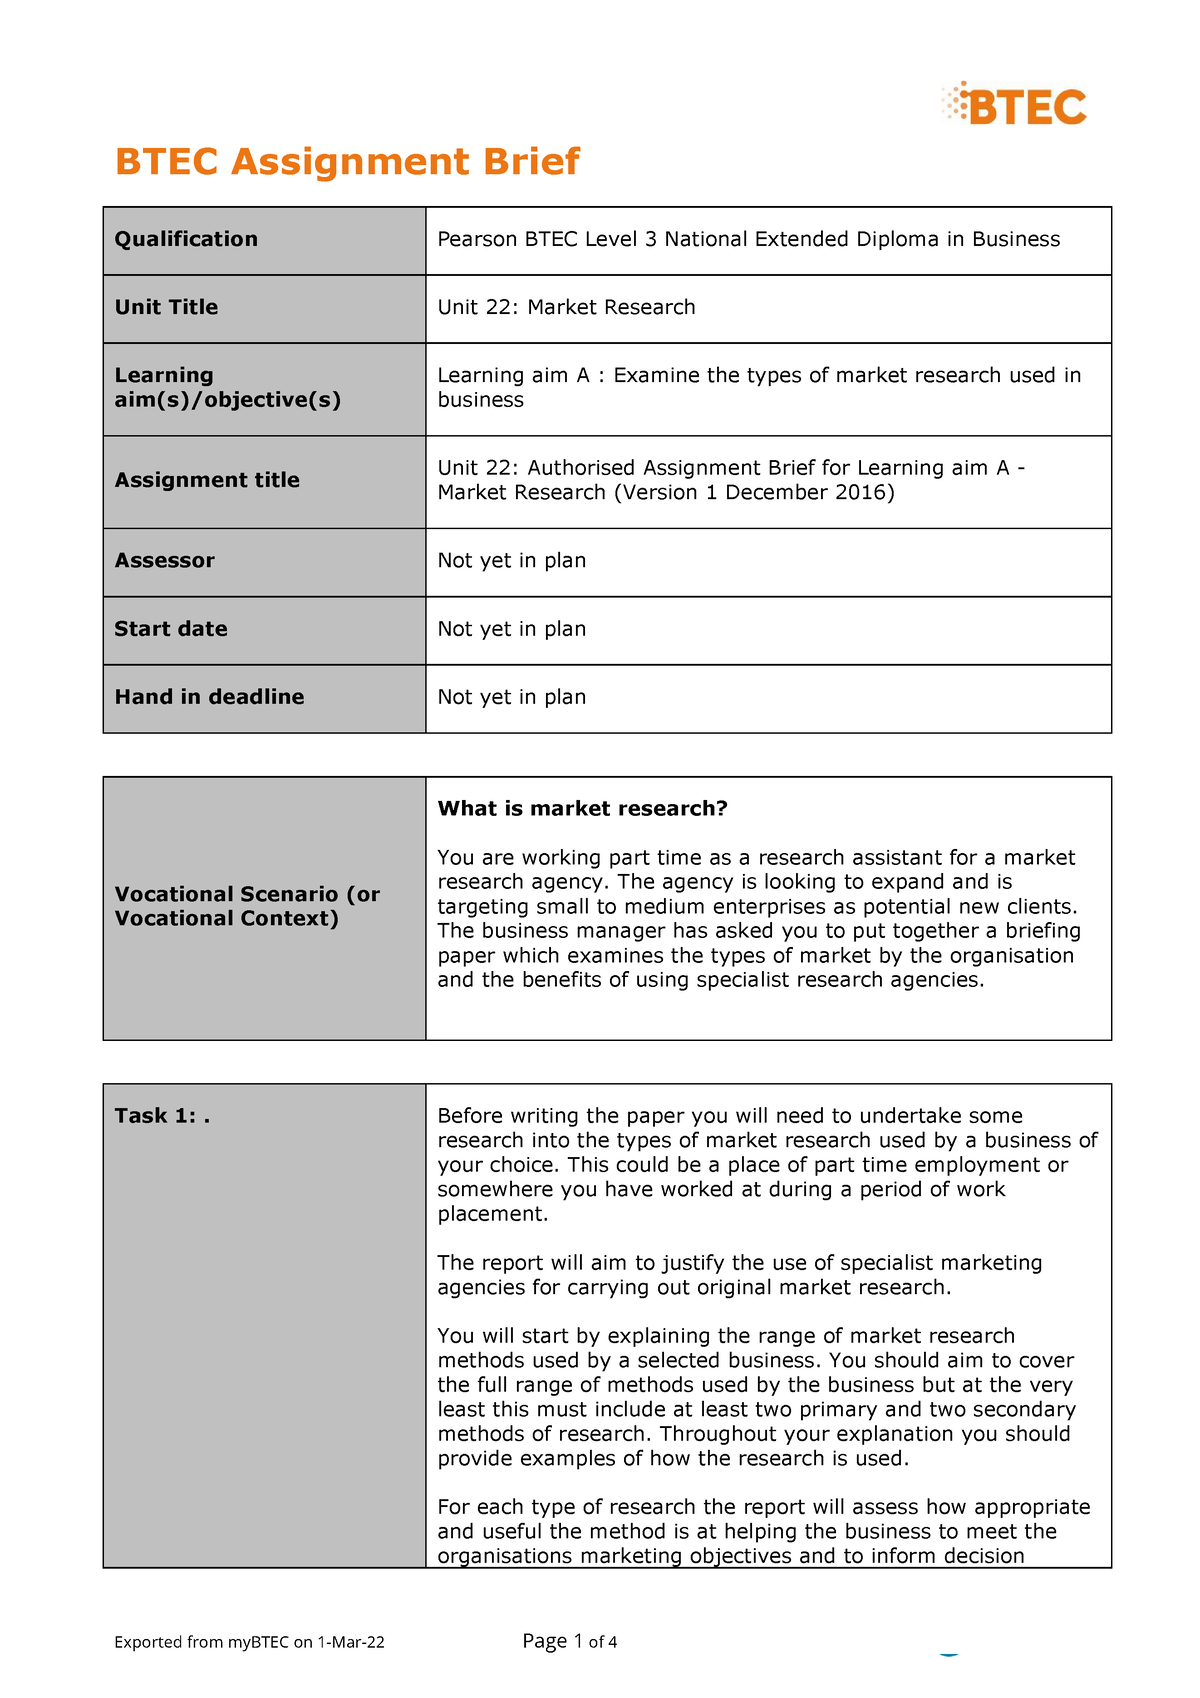 pearson btec assignment brief template